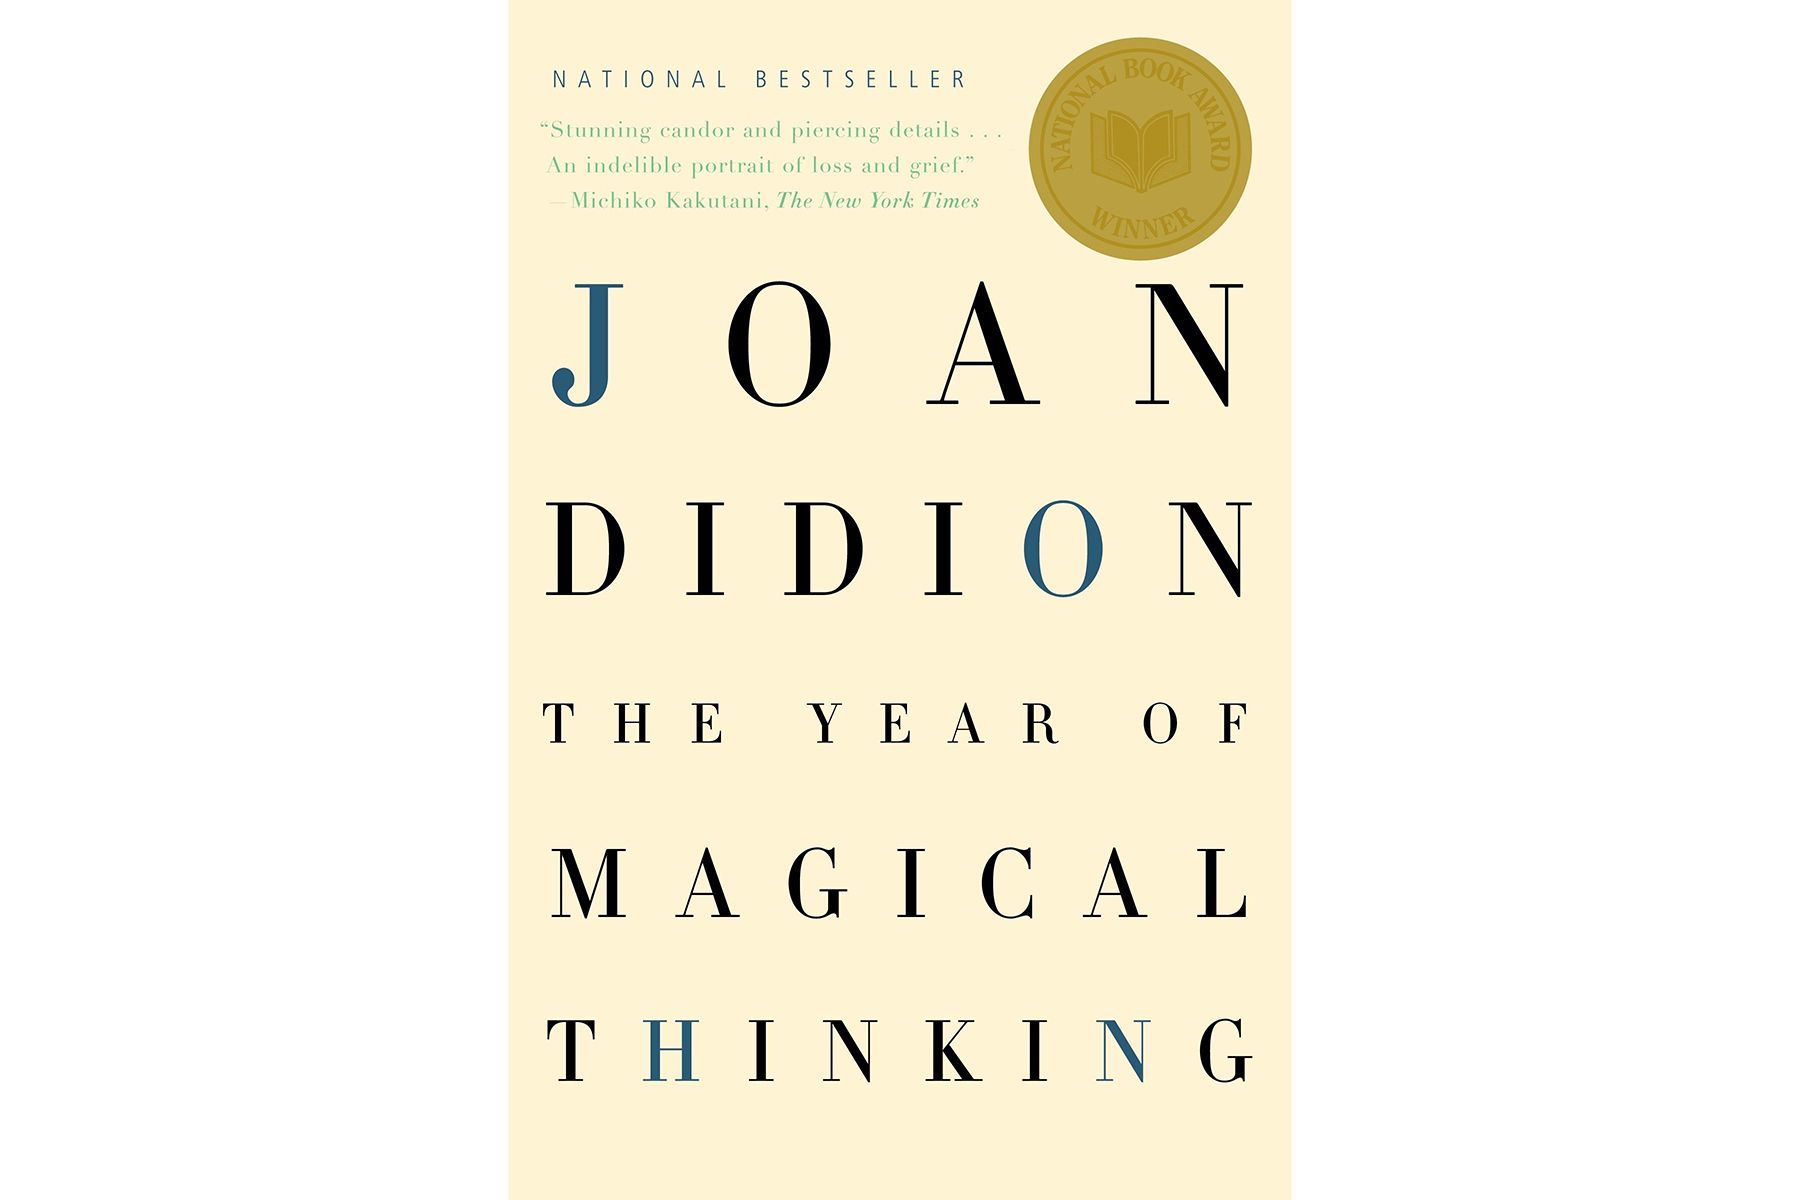 Naslovnica The Year of Magical Thinking, avtorice Joan Didion